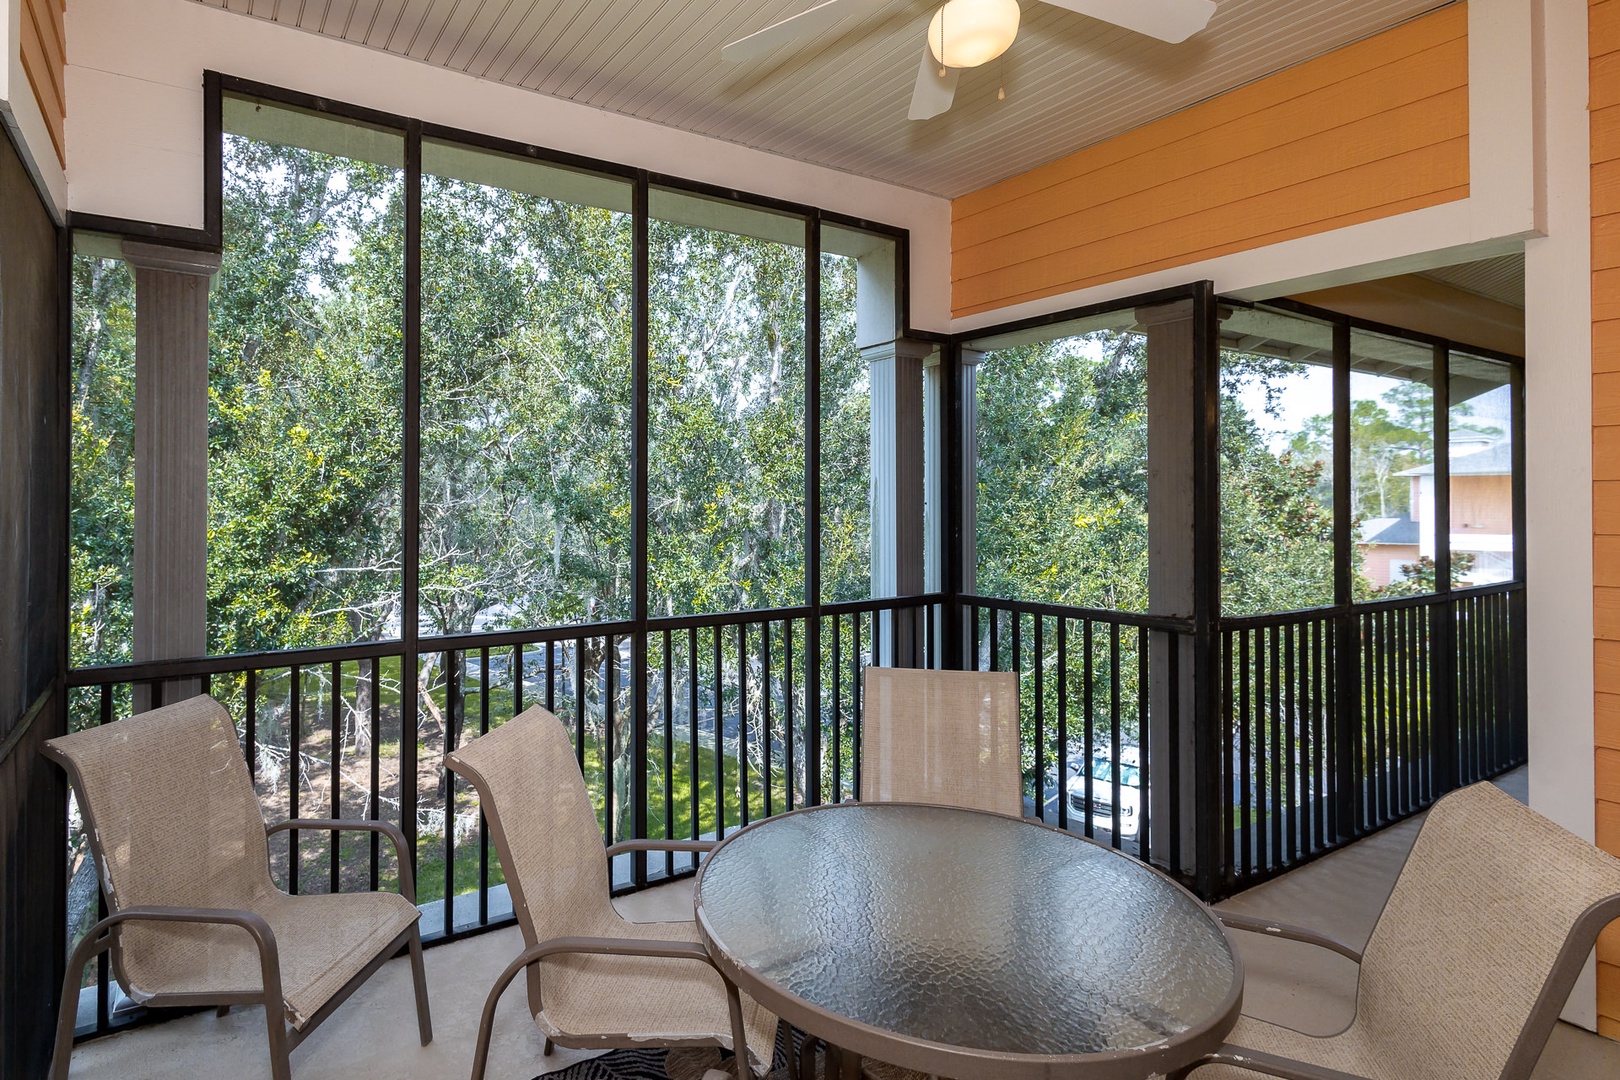 Screened in porch with ample seating